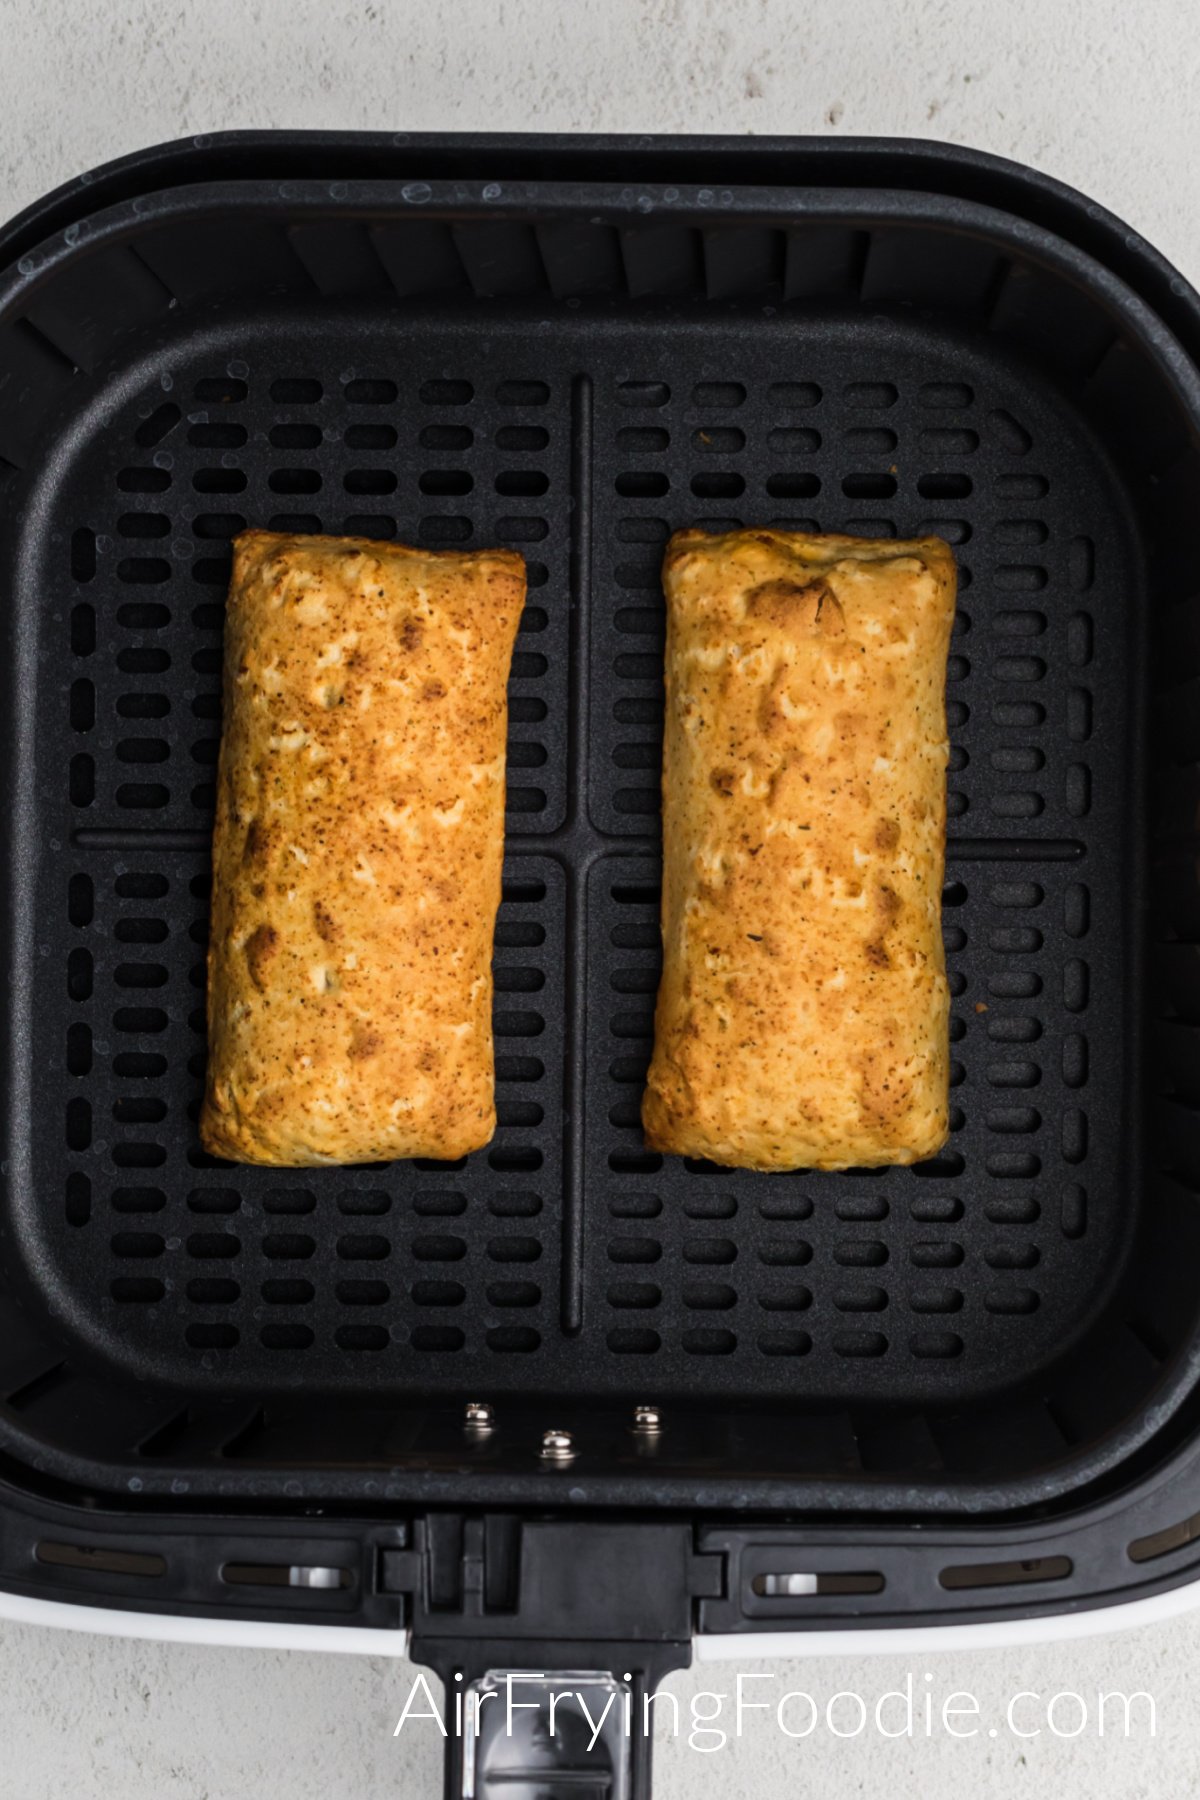 Fully cooked hot pockets in air fryer basket. 